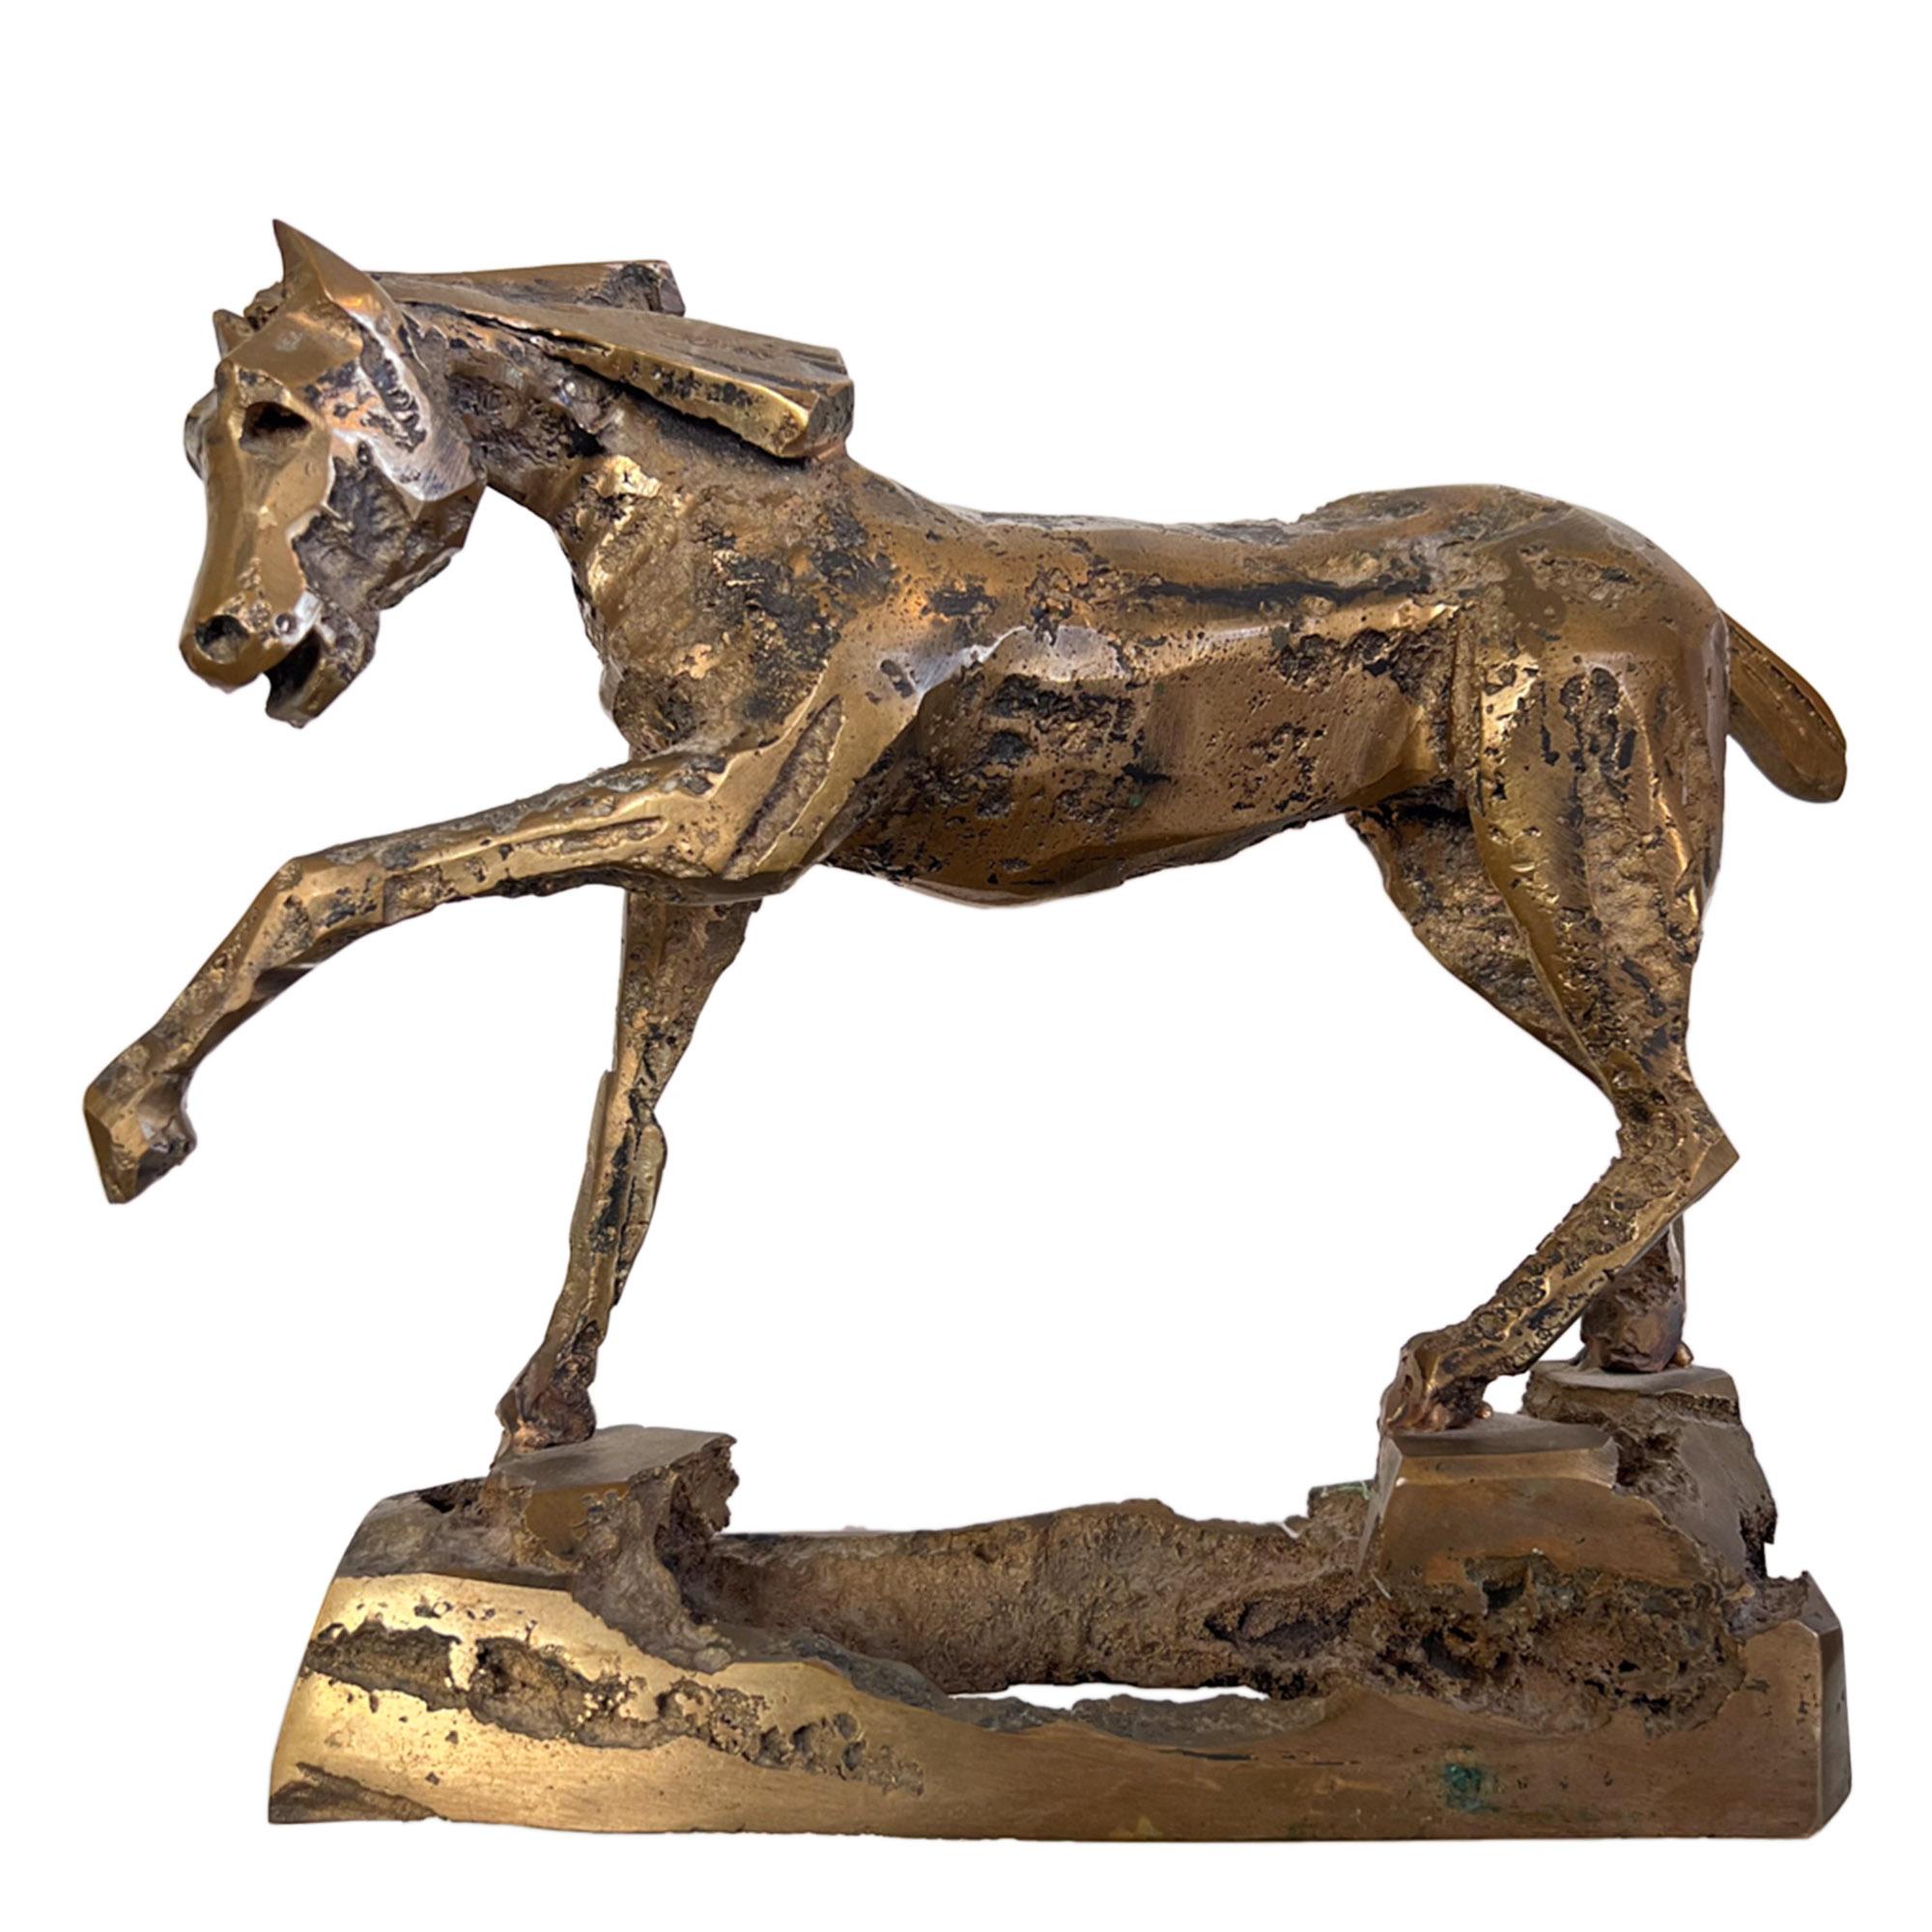 This beautiful bronze sculpture was made in France in the middle of the 20th century. 

The horse is standing with it's left front leg raised in a natural pose. Life-like and elegant, it has a slight brutalist look, while retaining a true